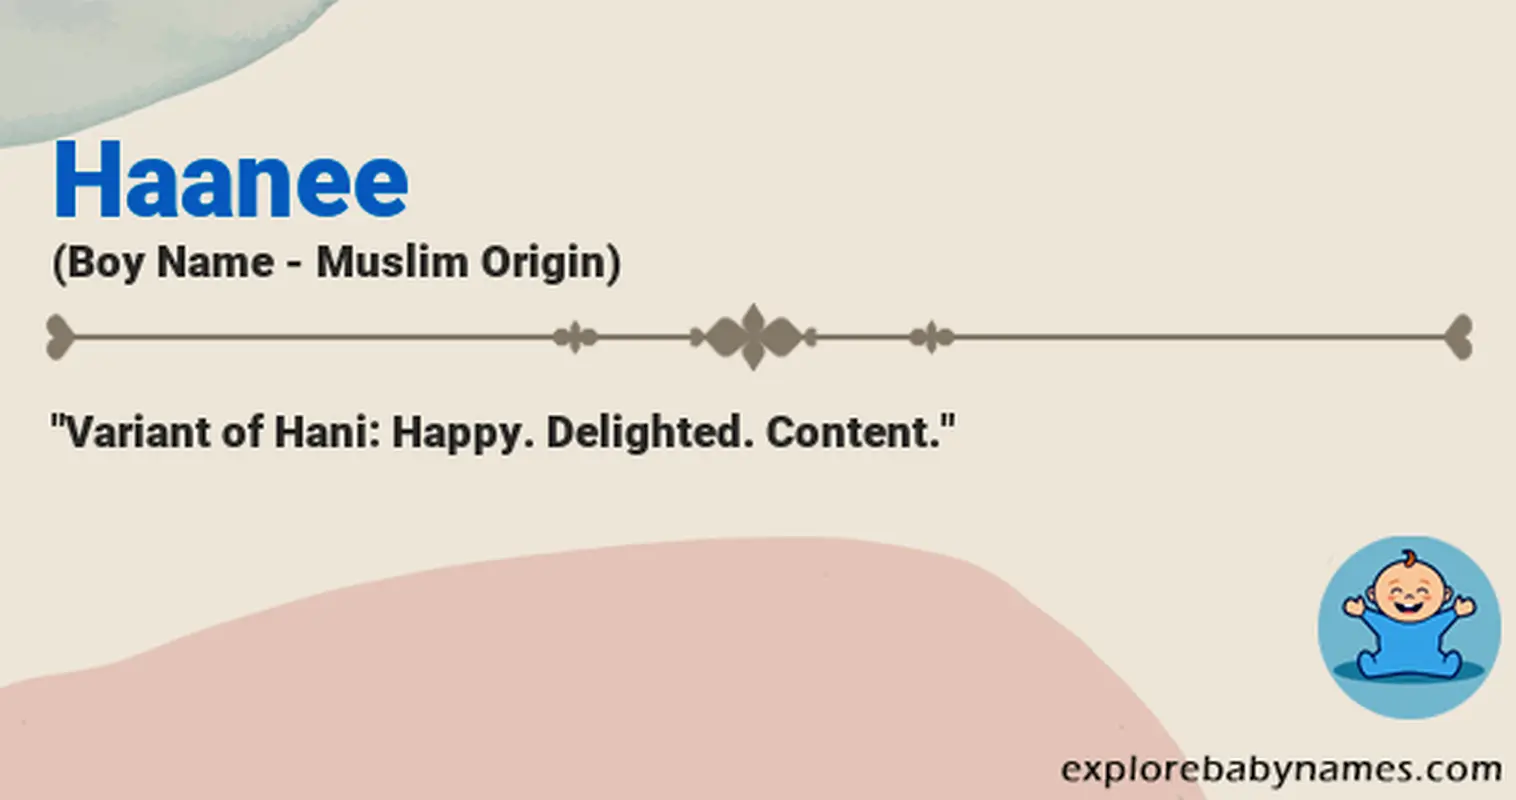 Meaning of Haanee